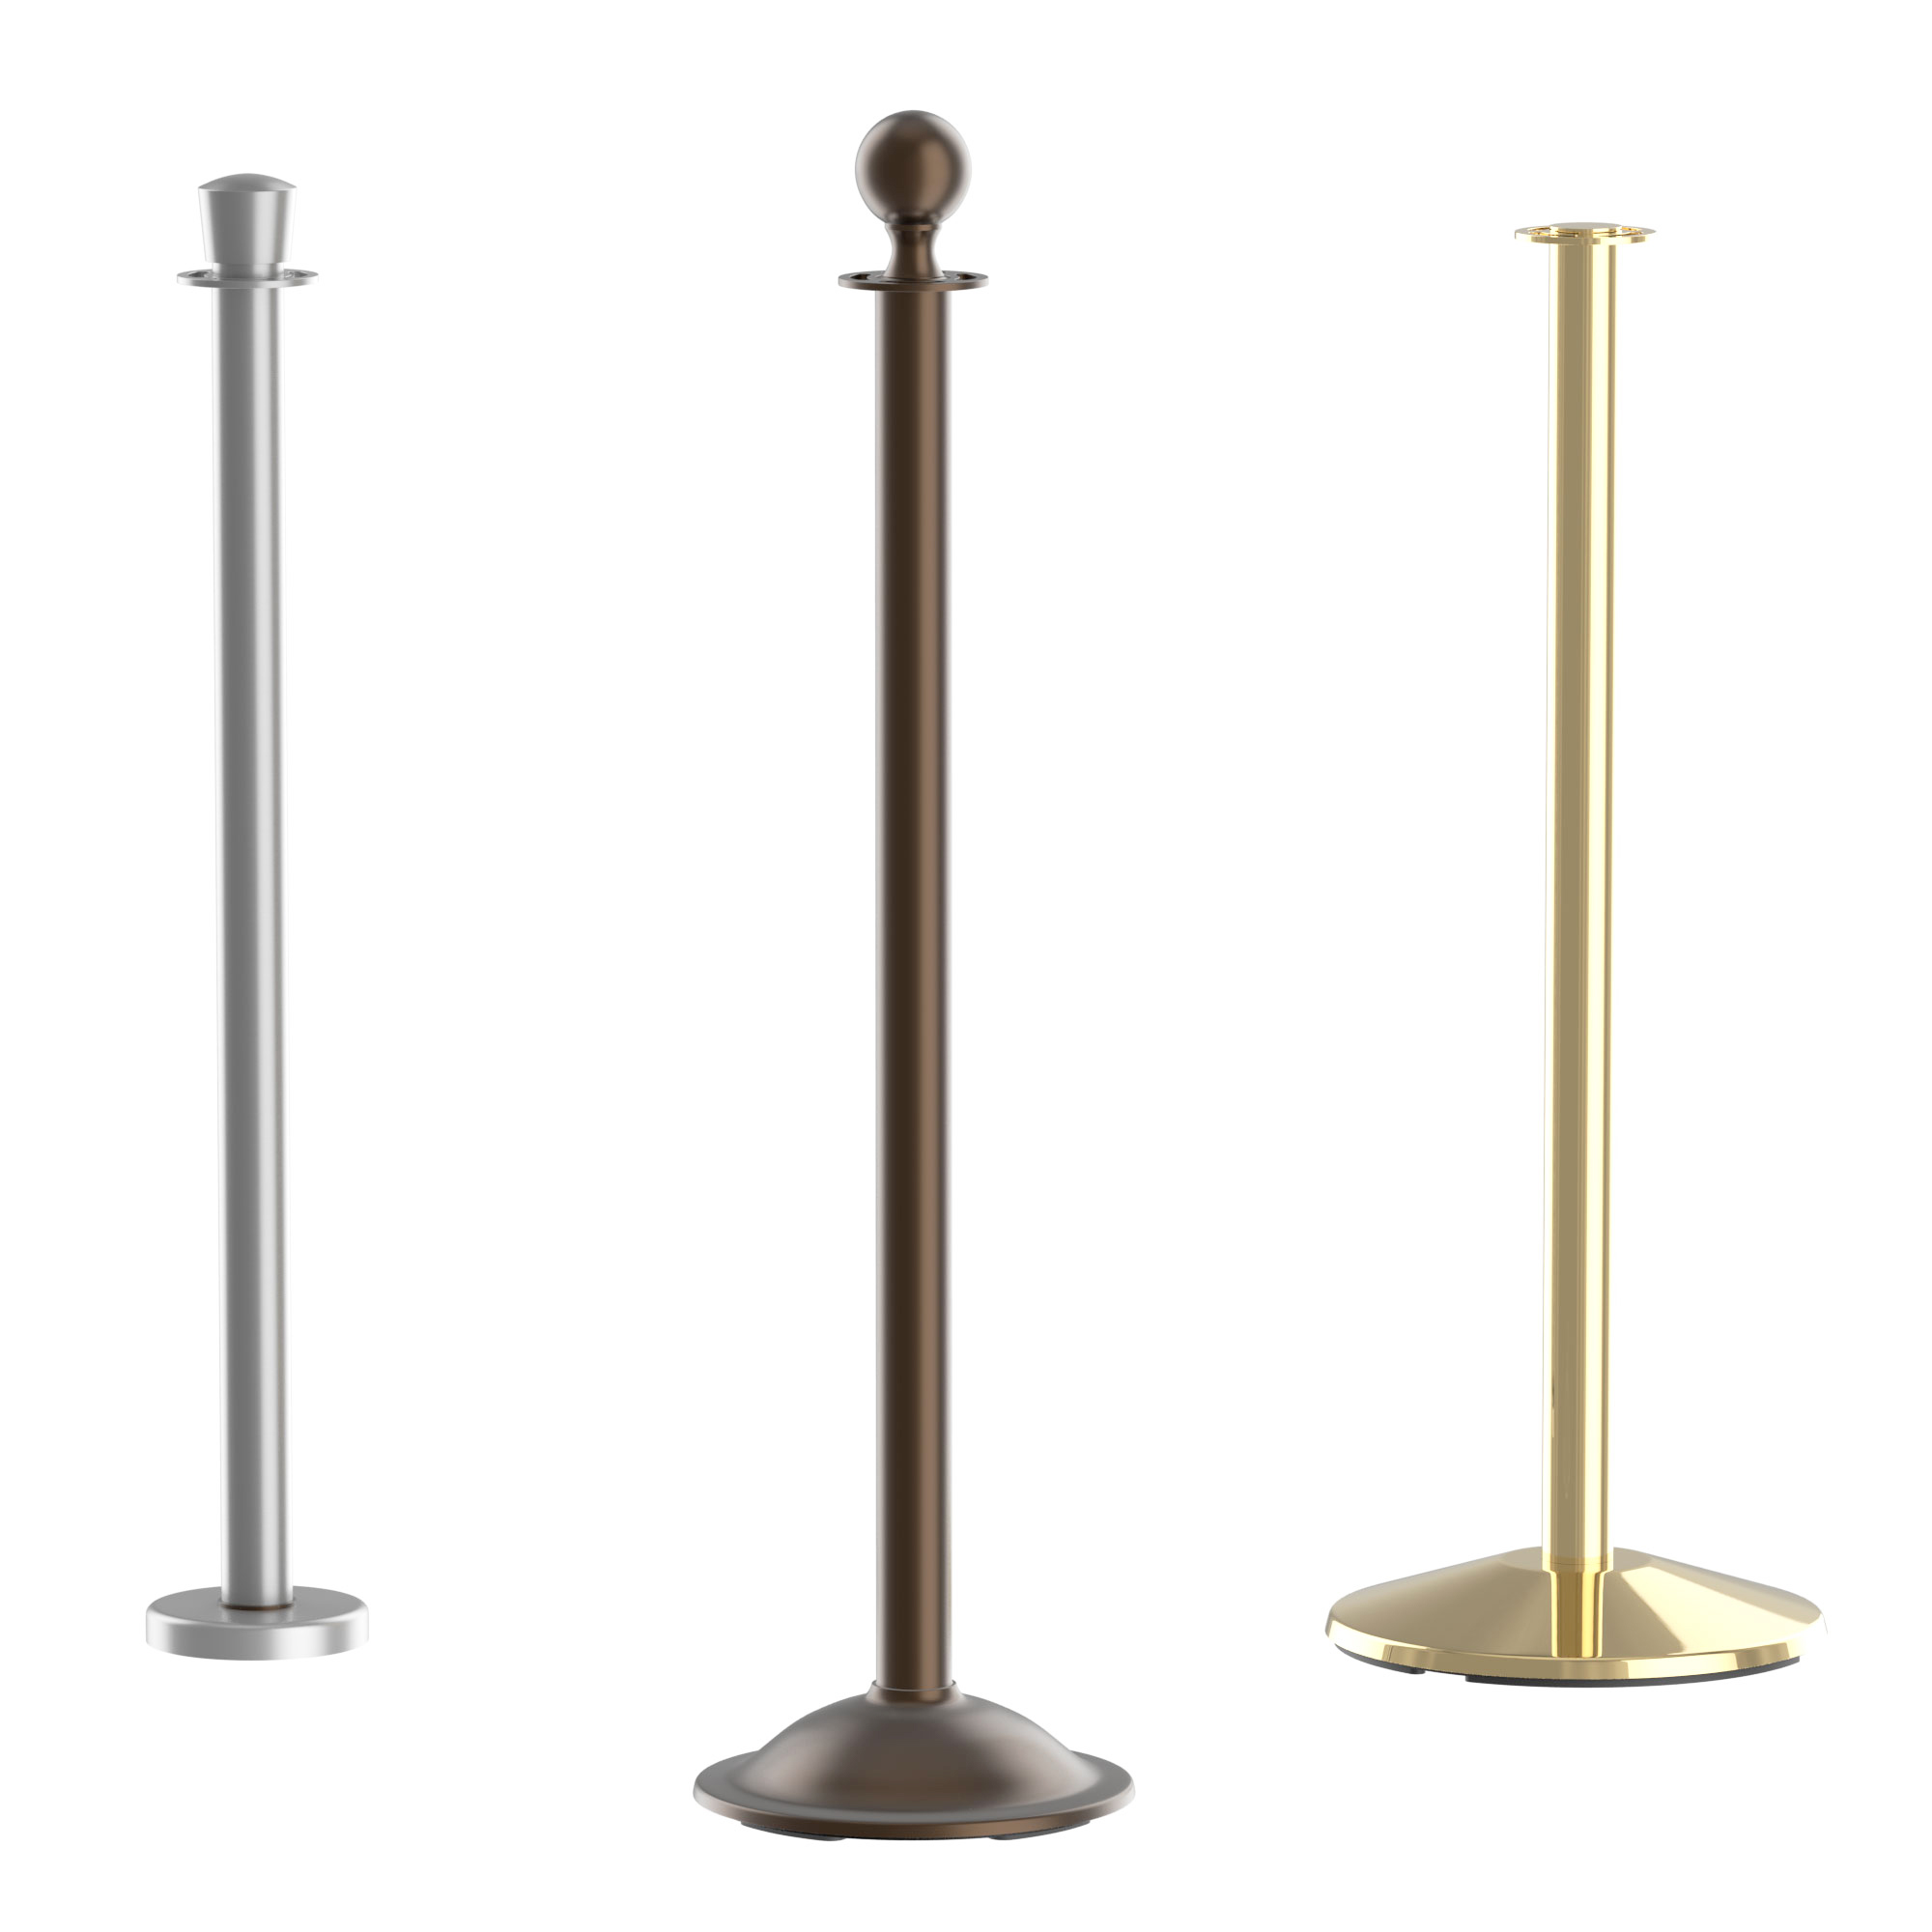 Post + Rope Stanchions from Visiontron Made in the U.S.A.